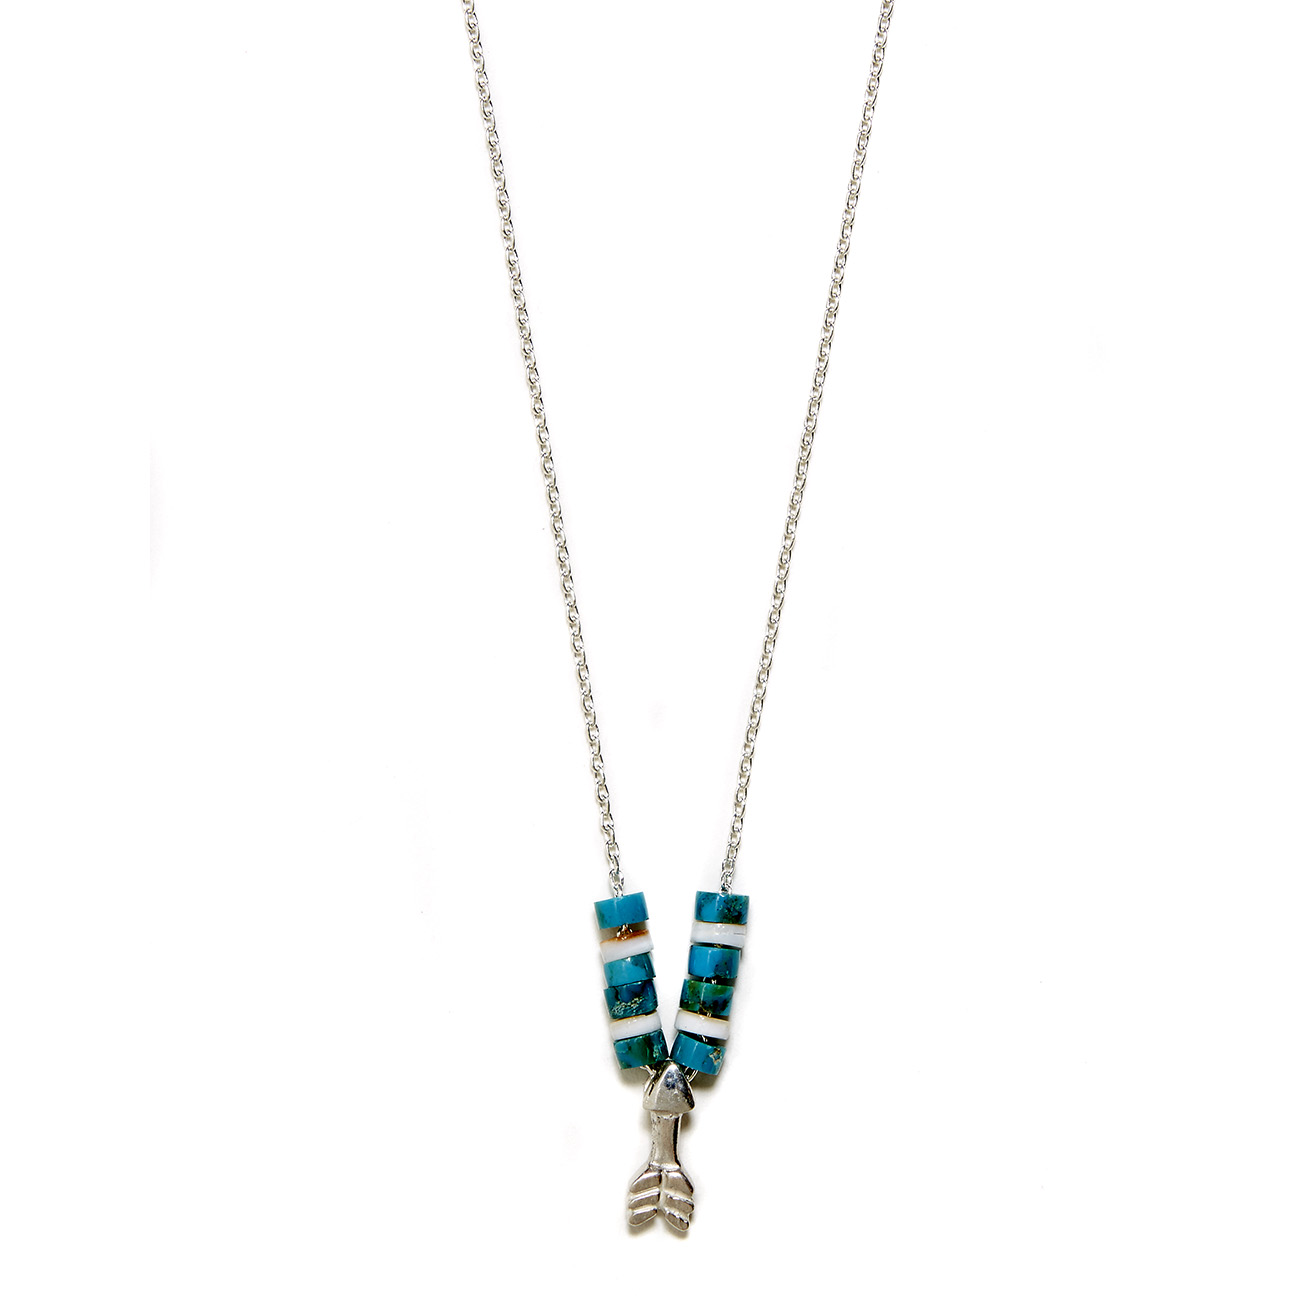 Elisa Solomon - Sterling Silver Arrow Necklace With Beads